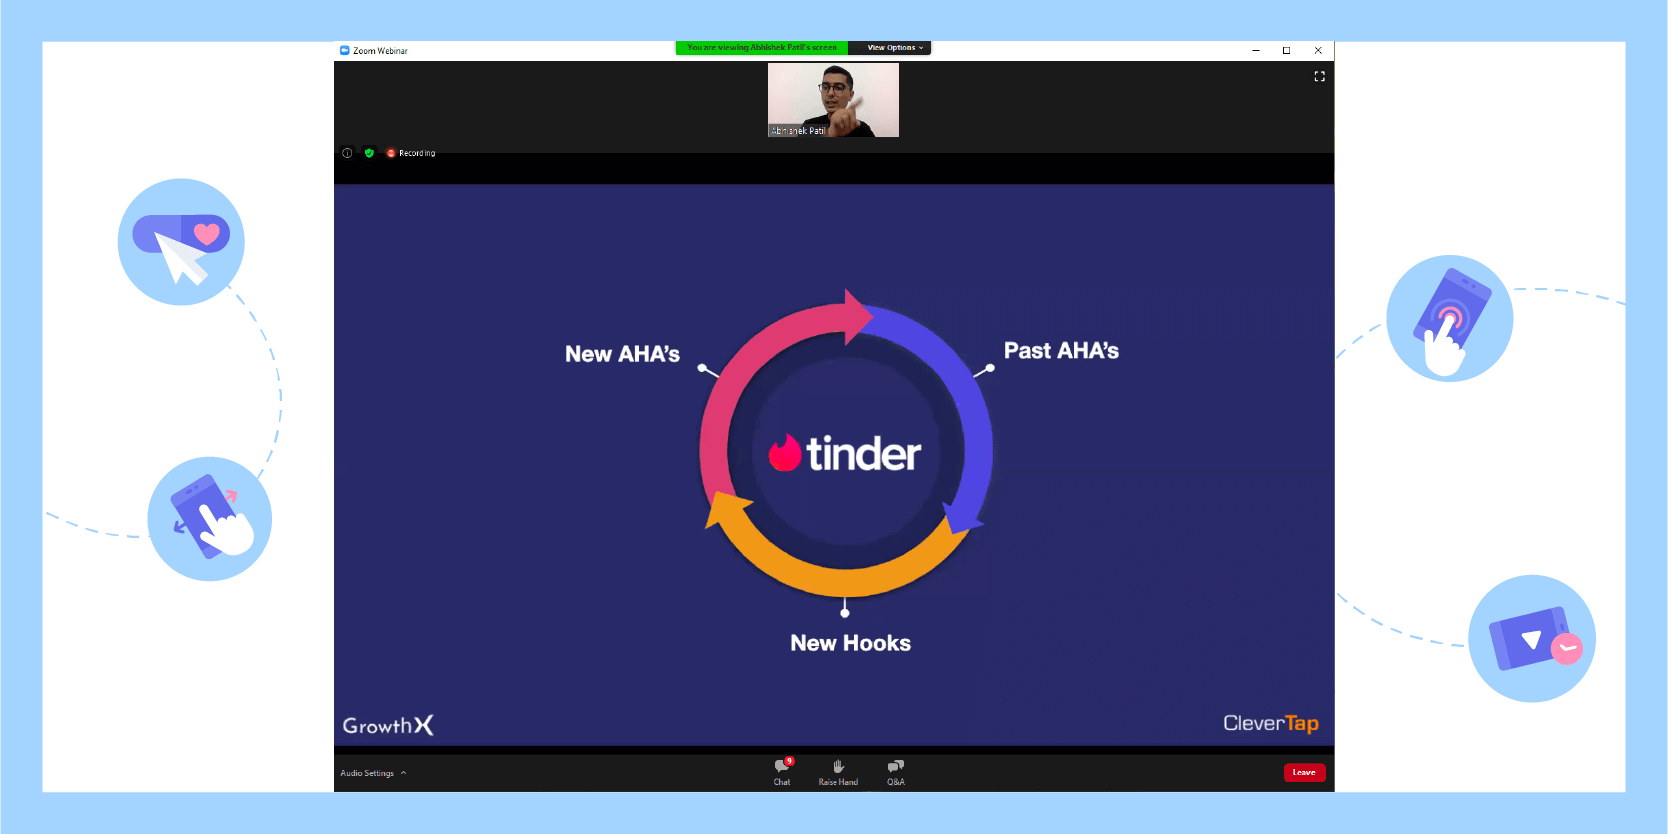 Engagement Metrics: Chart showing how Tinder engages its users